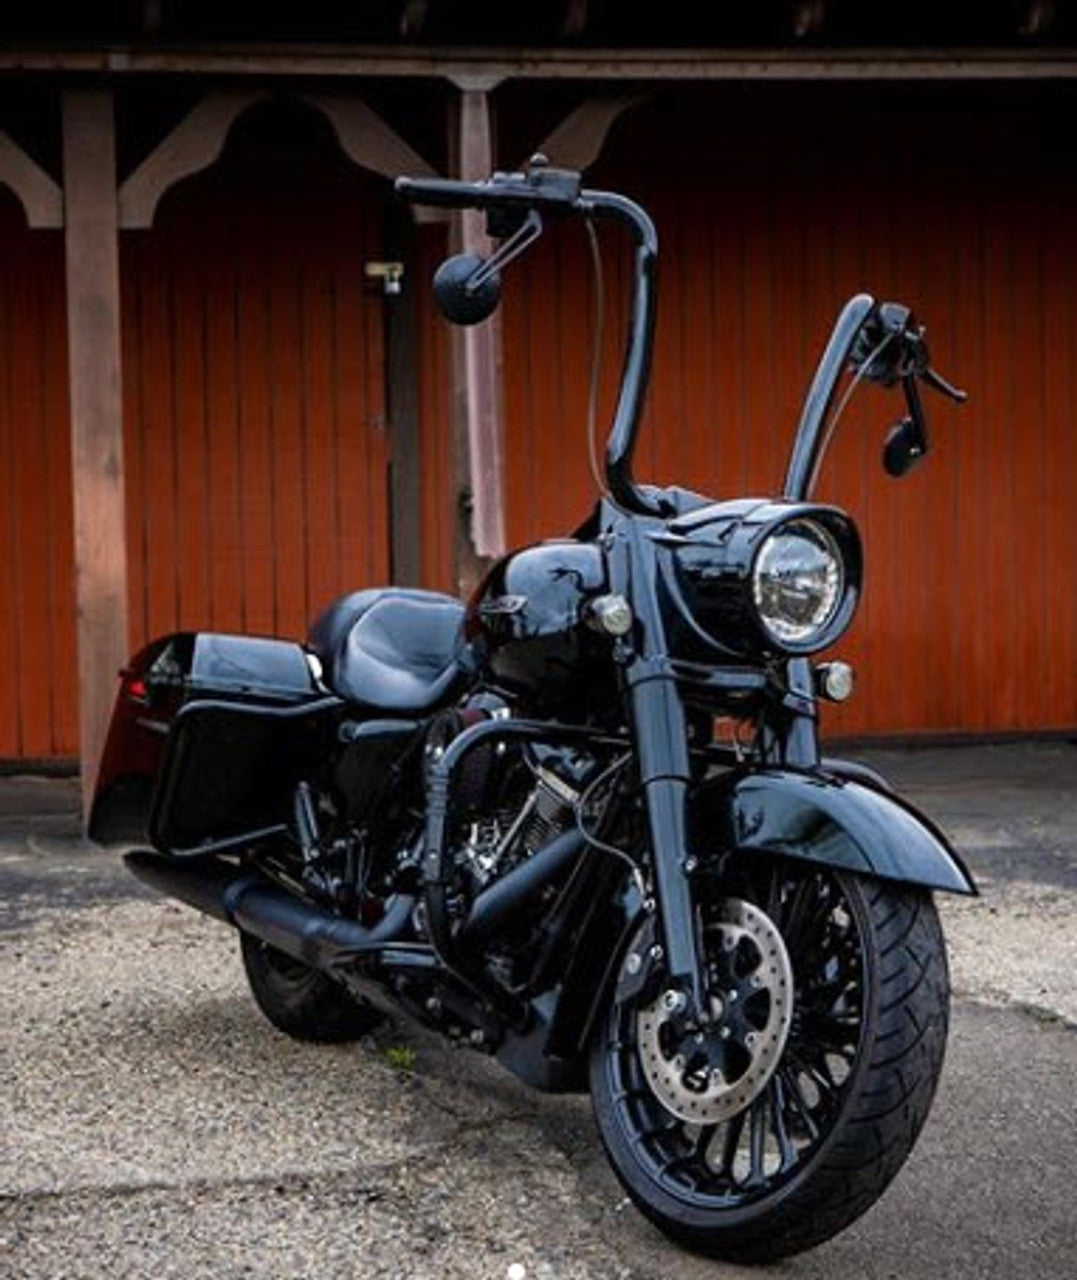 A black Factory 47 motorcycle parked in front of a barn.